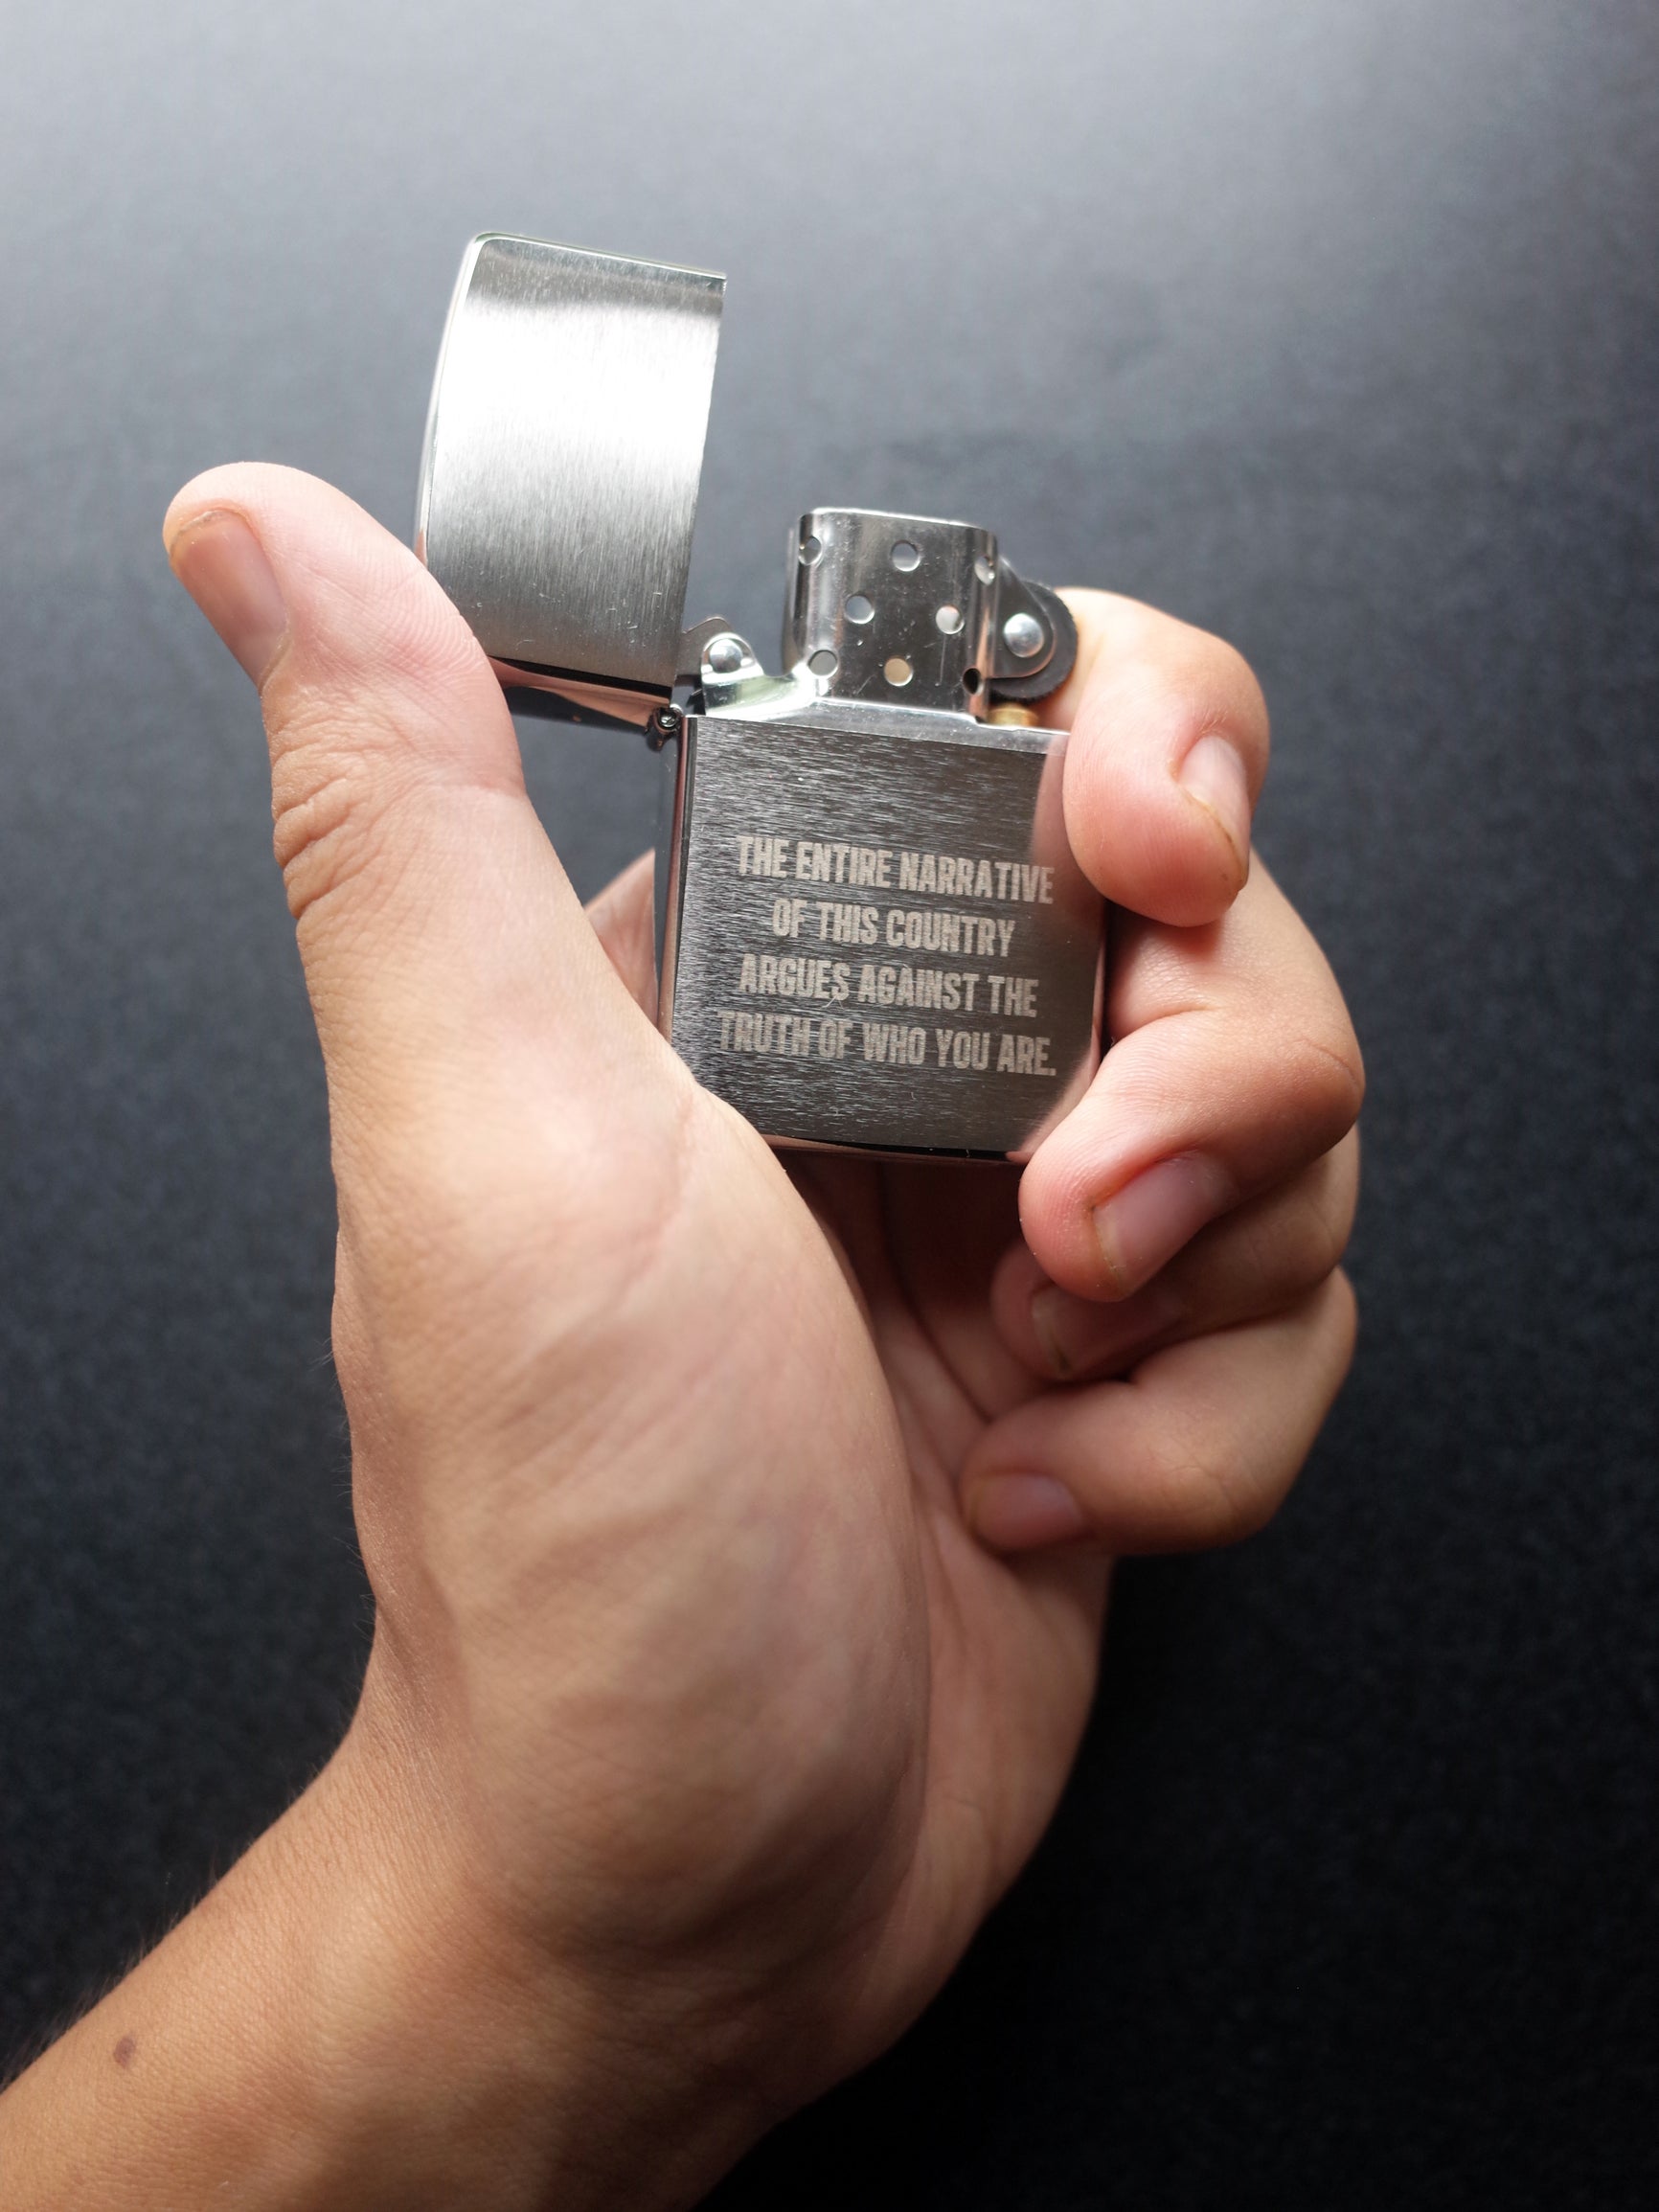 A hand holding an open Zippo style lighter with the engraving "THE ENTIRE NARRATIVE OF THIS COUNTRY ARGUES AGAINST THE TRUTH OF WHO YOU ARE."